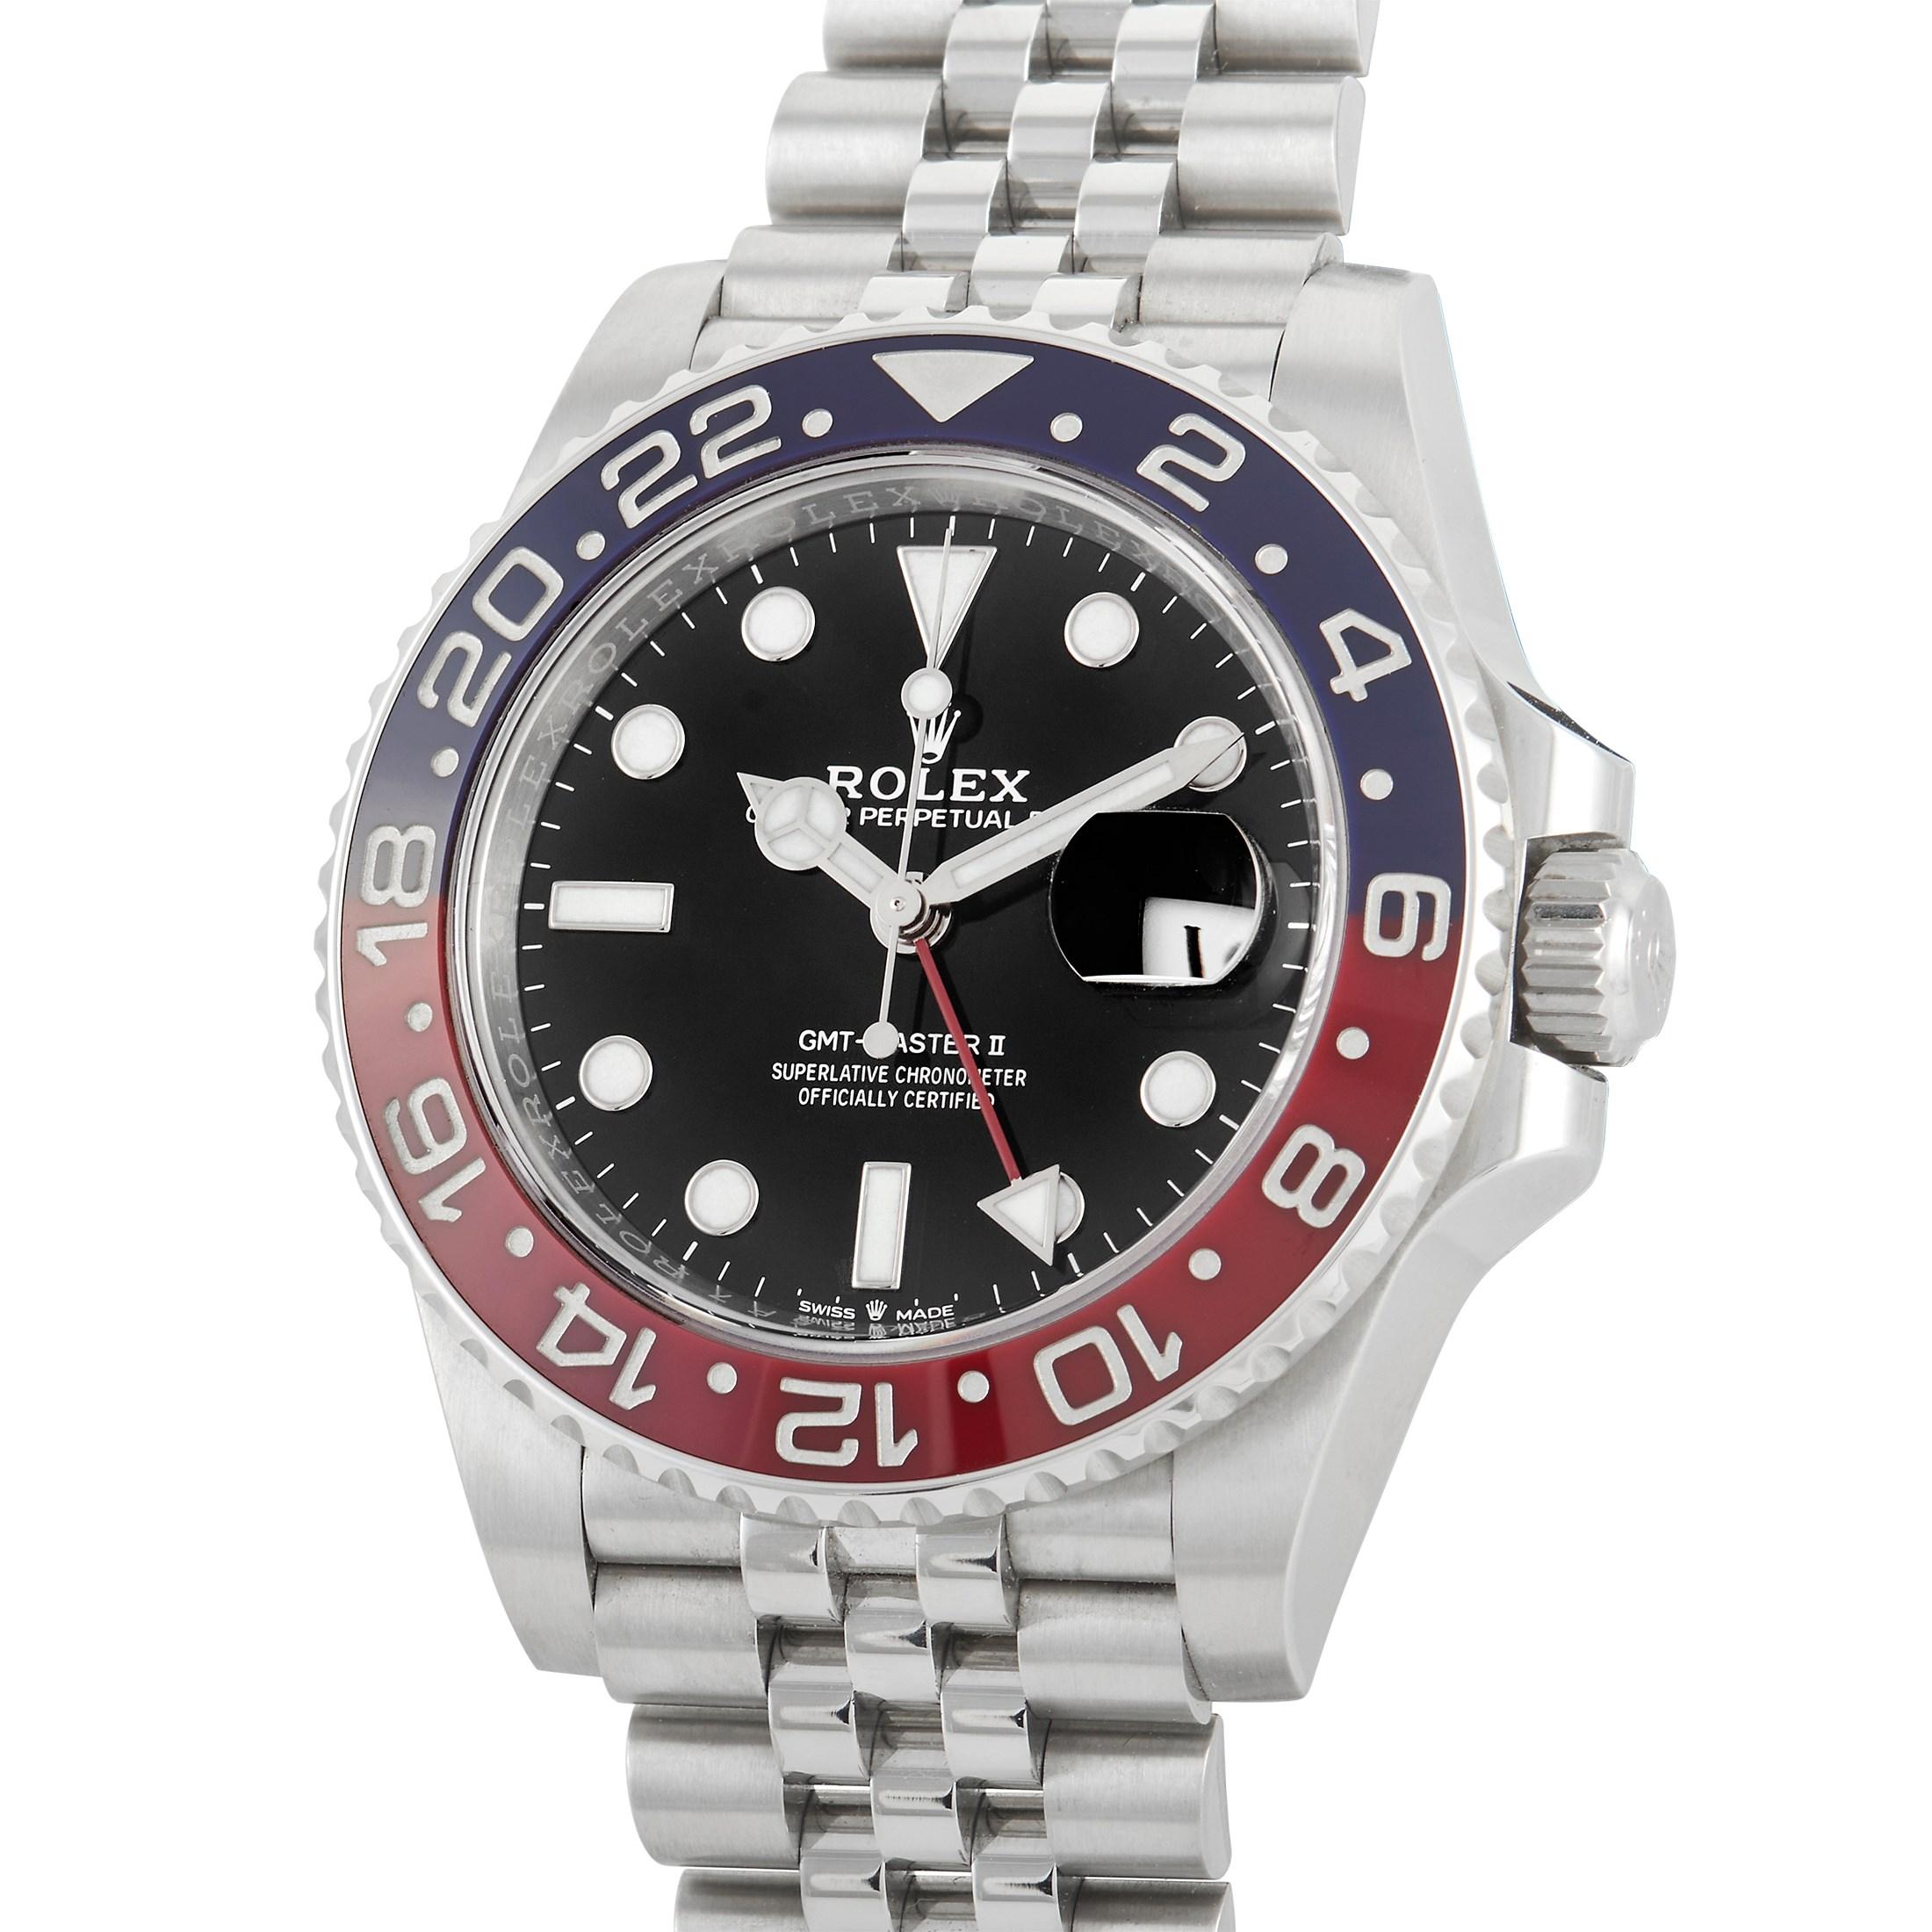 The Rolex GMT-Master II Watch, reference number 126710BLRO-0001, is luxurious enough to make a statement yet casual enough for everyday wear.

Crafted from stainless steel, this sleek style boasts a 40mm case and a sleek steel jubilee bracelet.